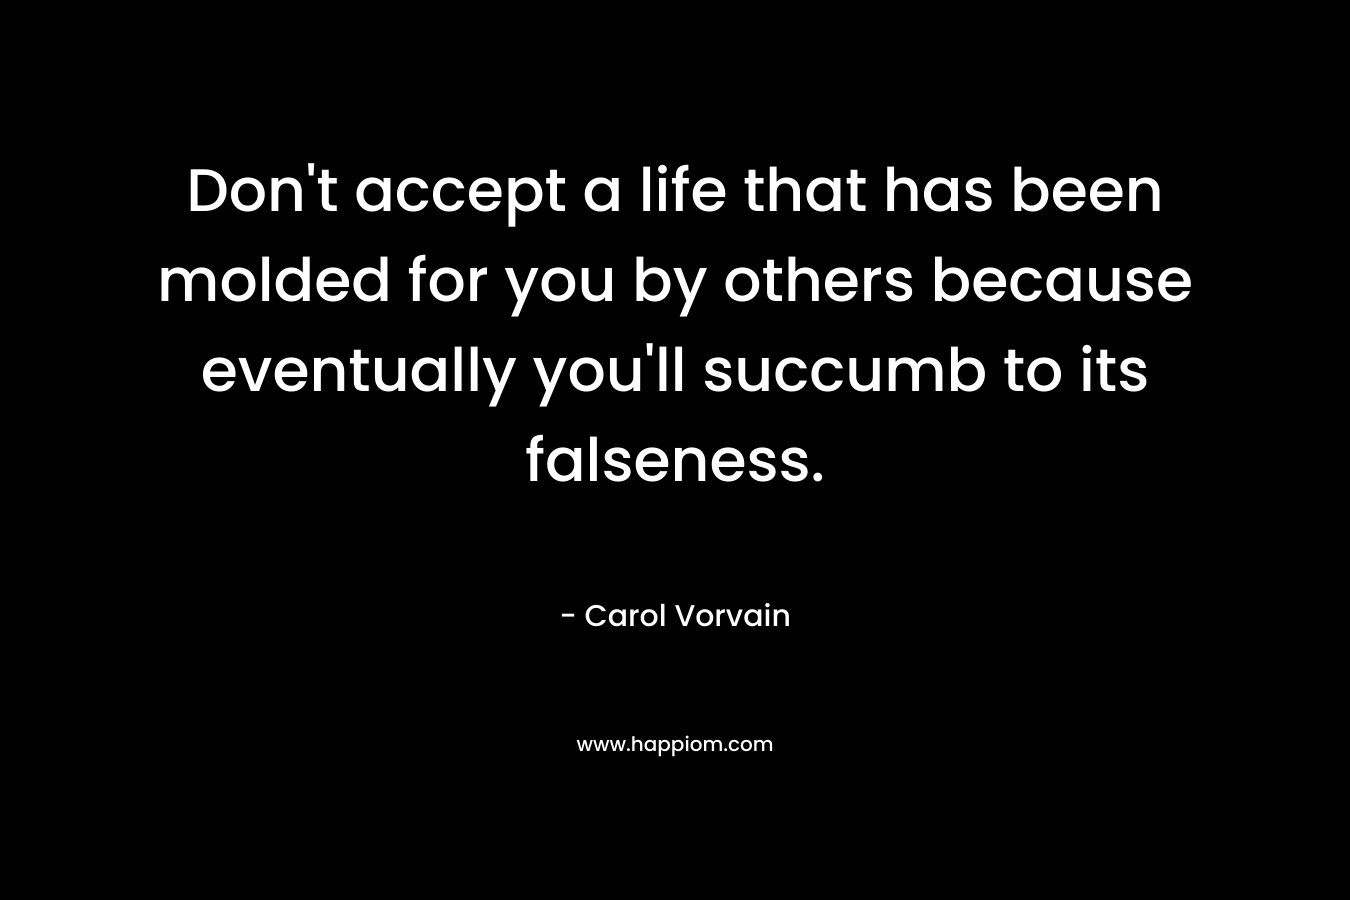 Don't accept a life that has been molded for you by others because eventually you'll succumb to its falseness.